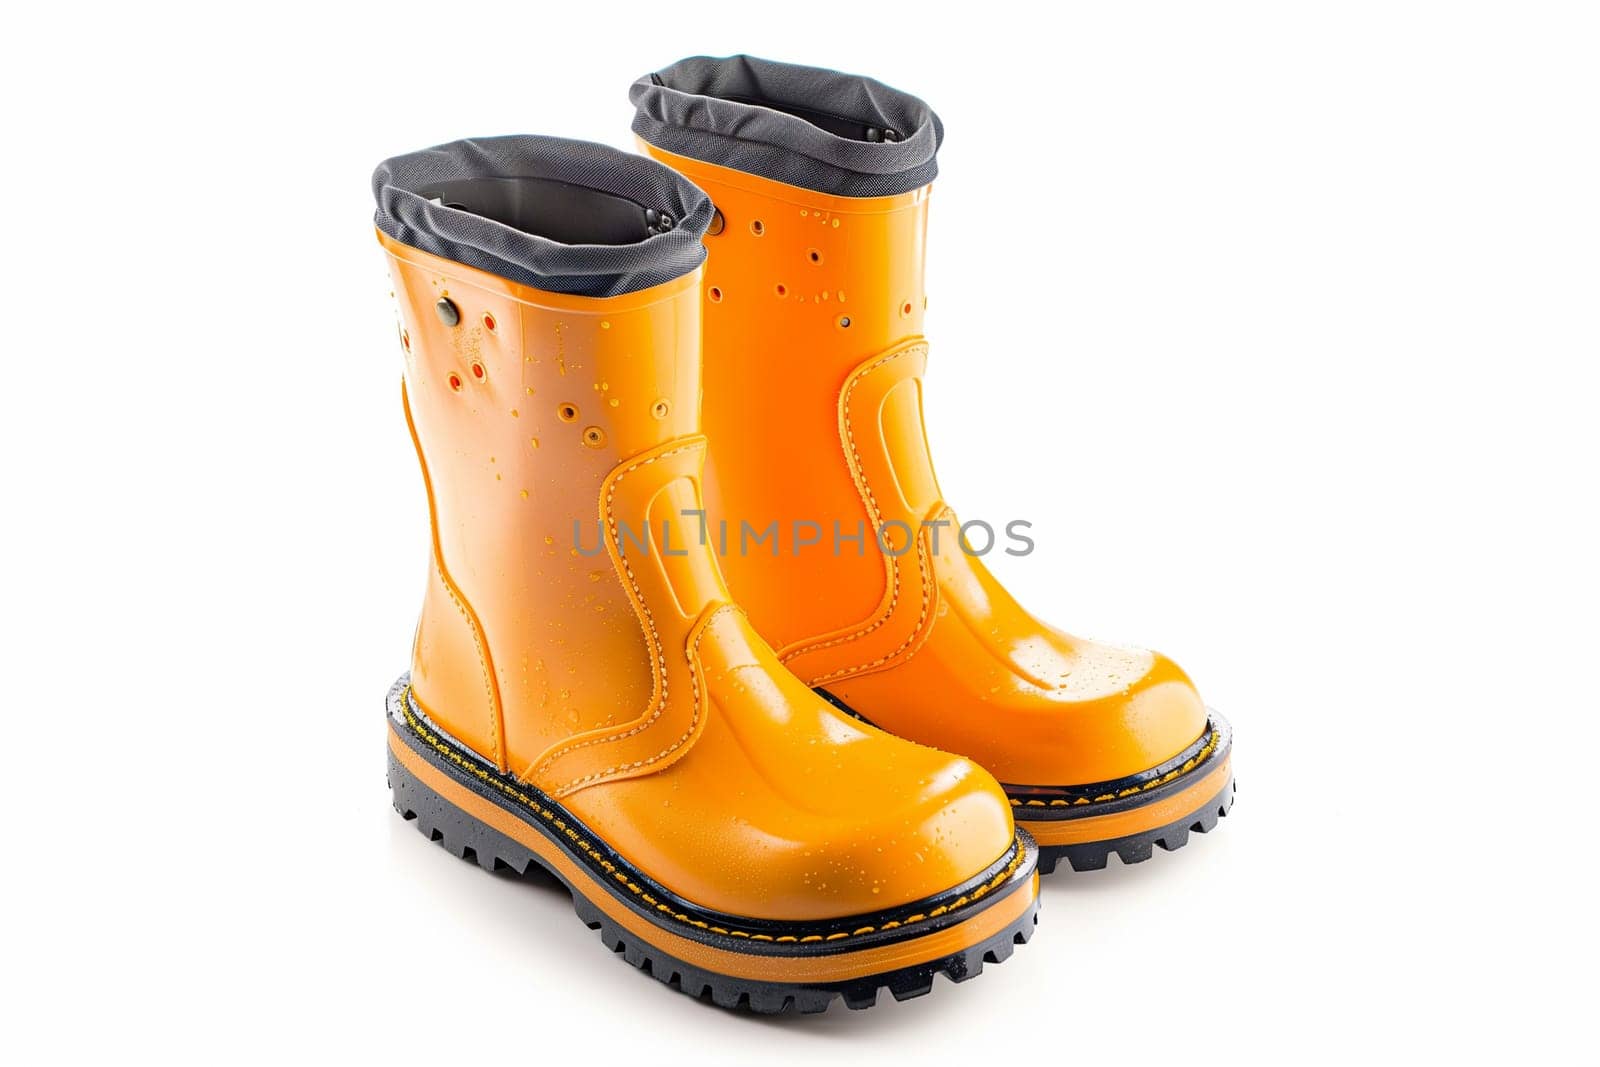 A pair of bright yellow boots placed on a clean white background, showcasing their vibrant color and sturdy design.